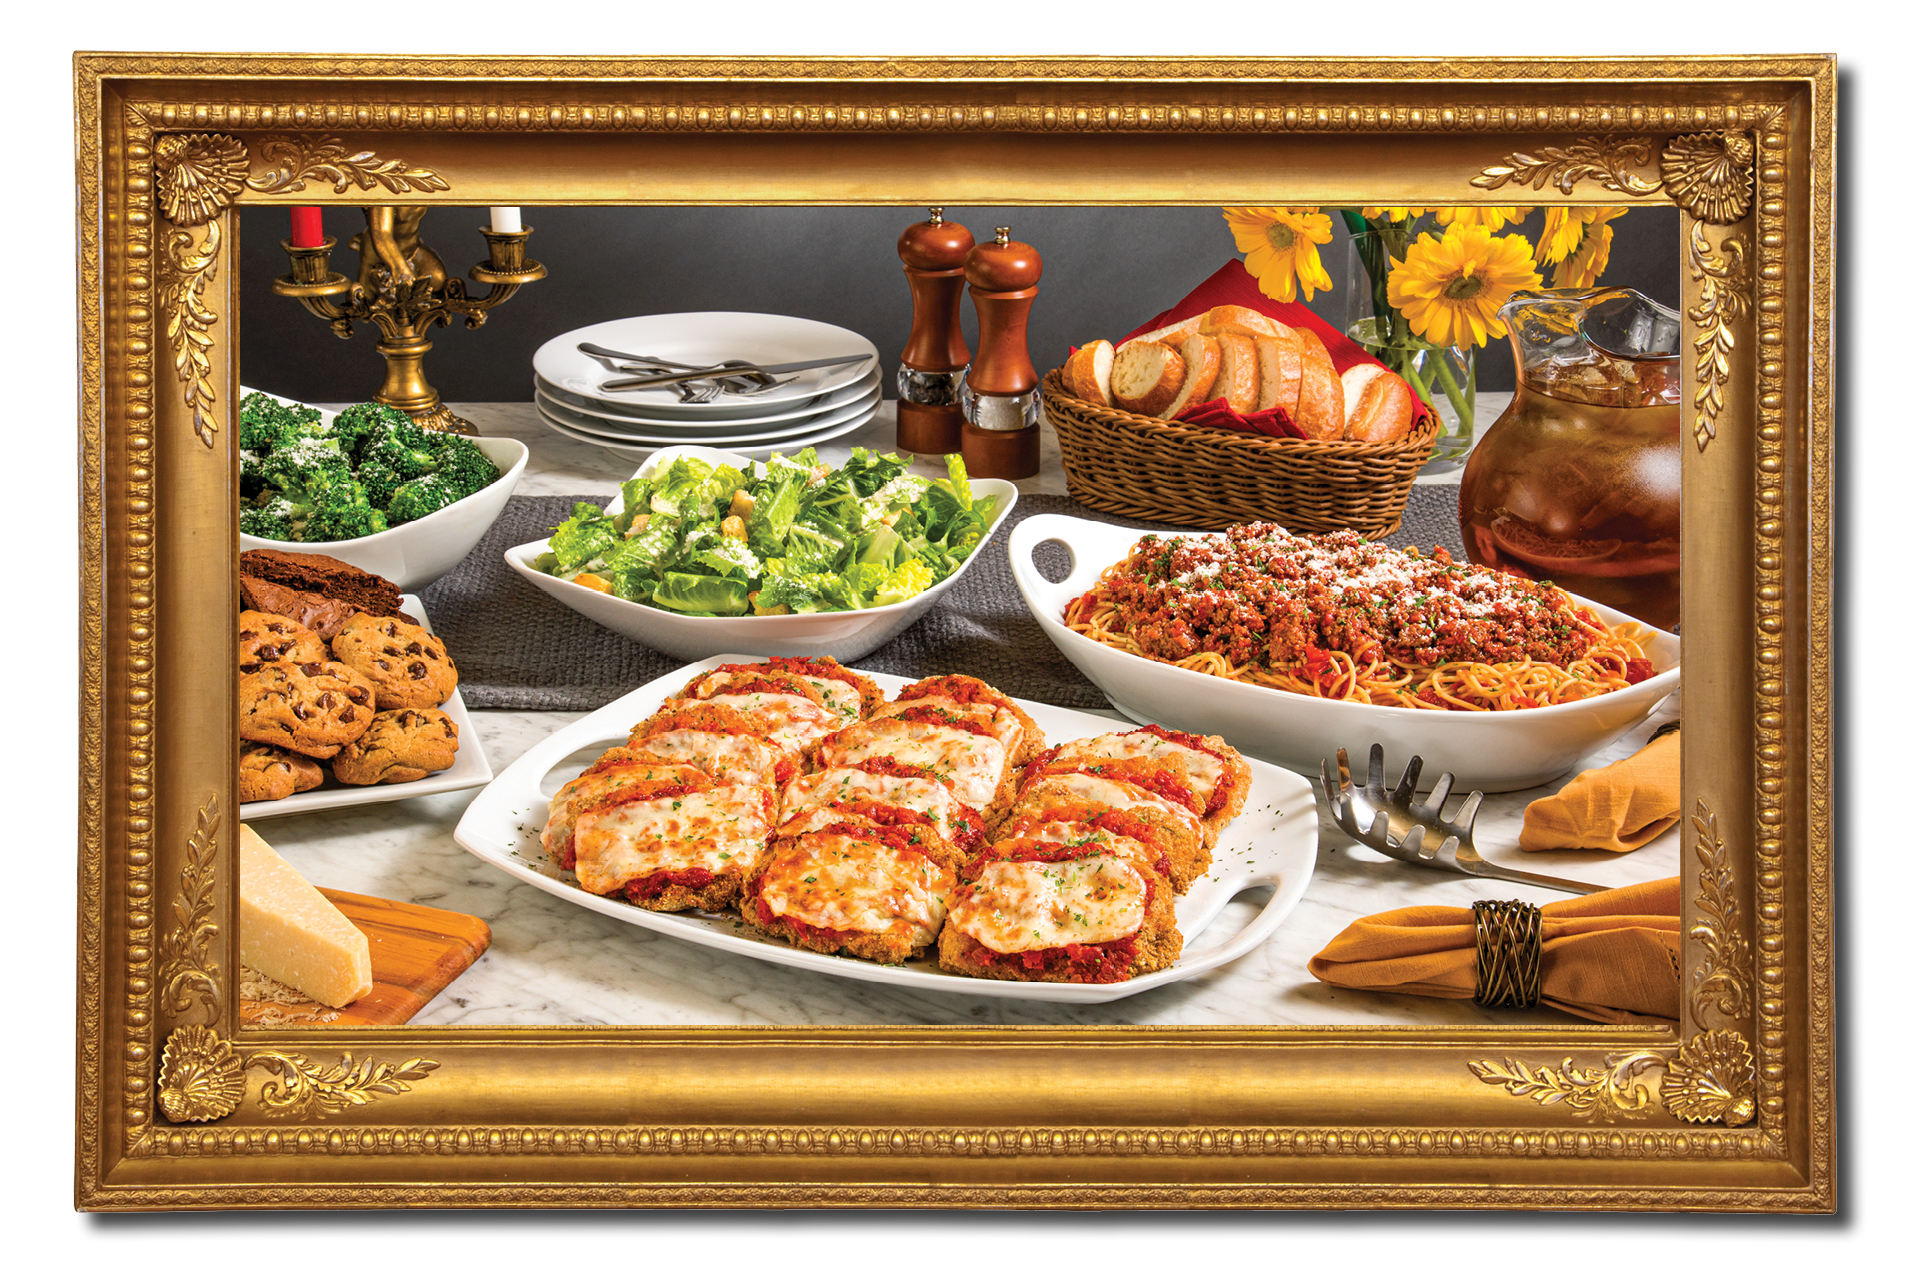 A spread of catering dishes from Buca di Beppo